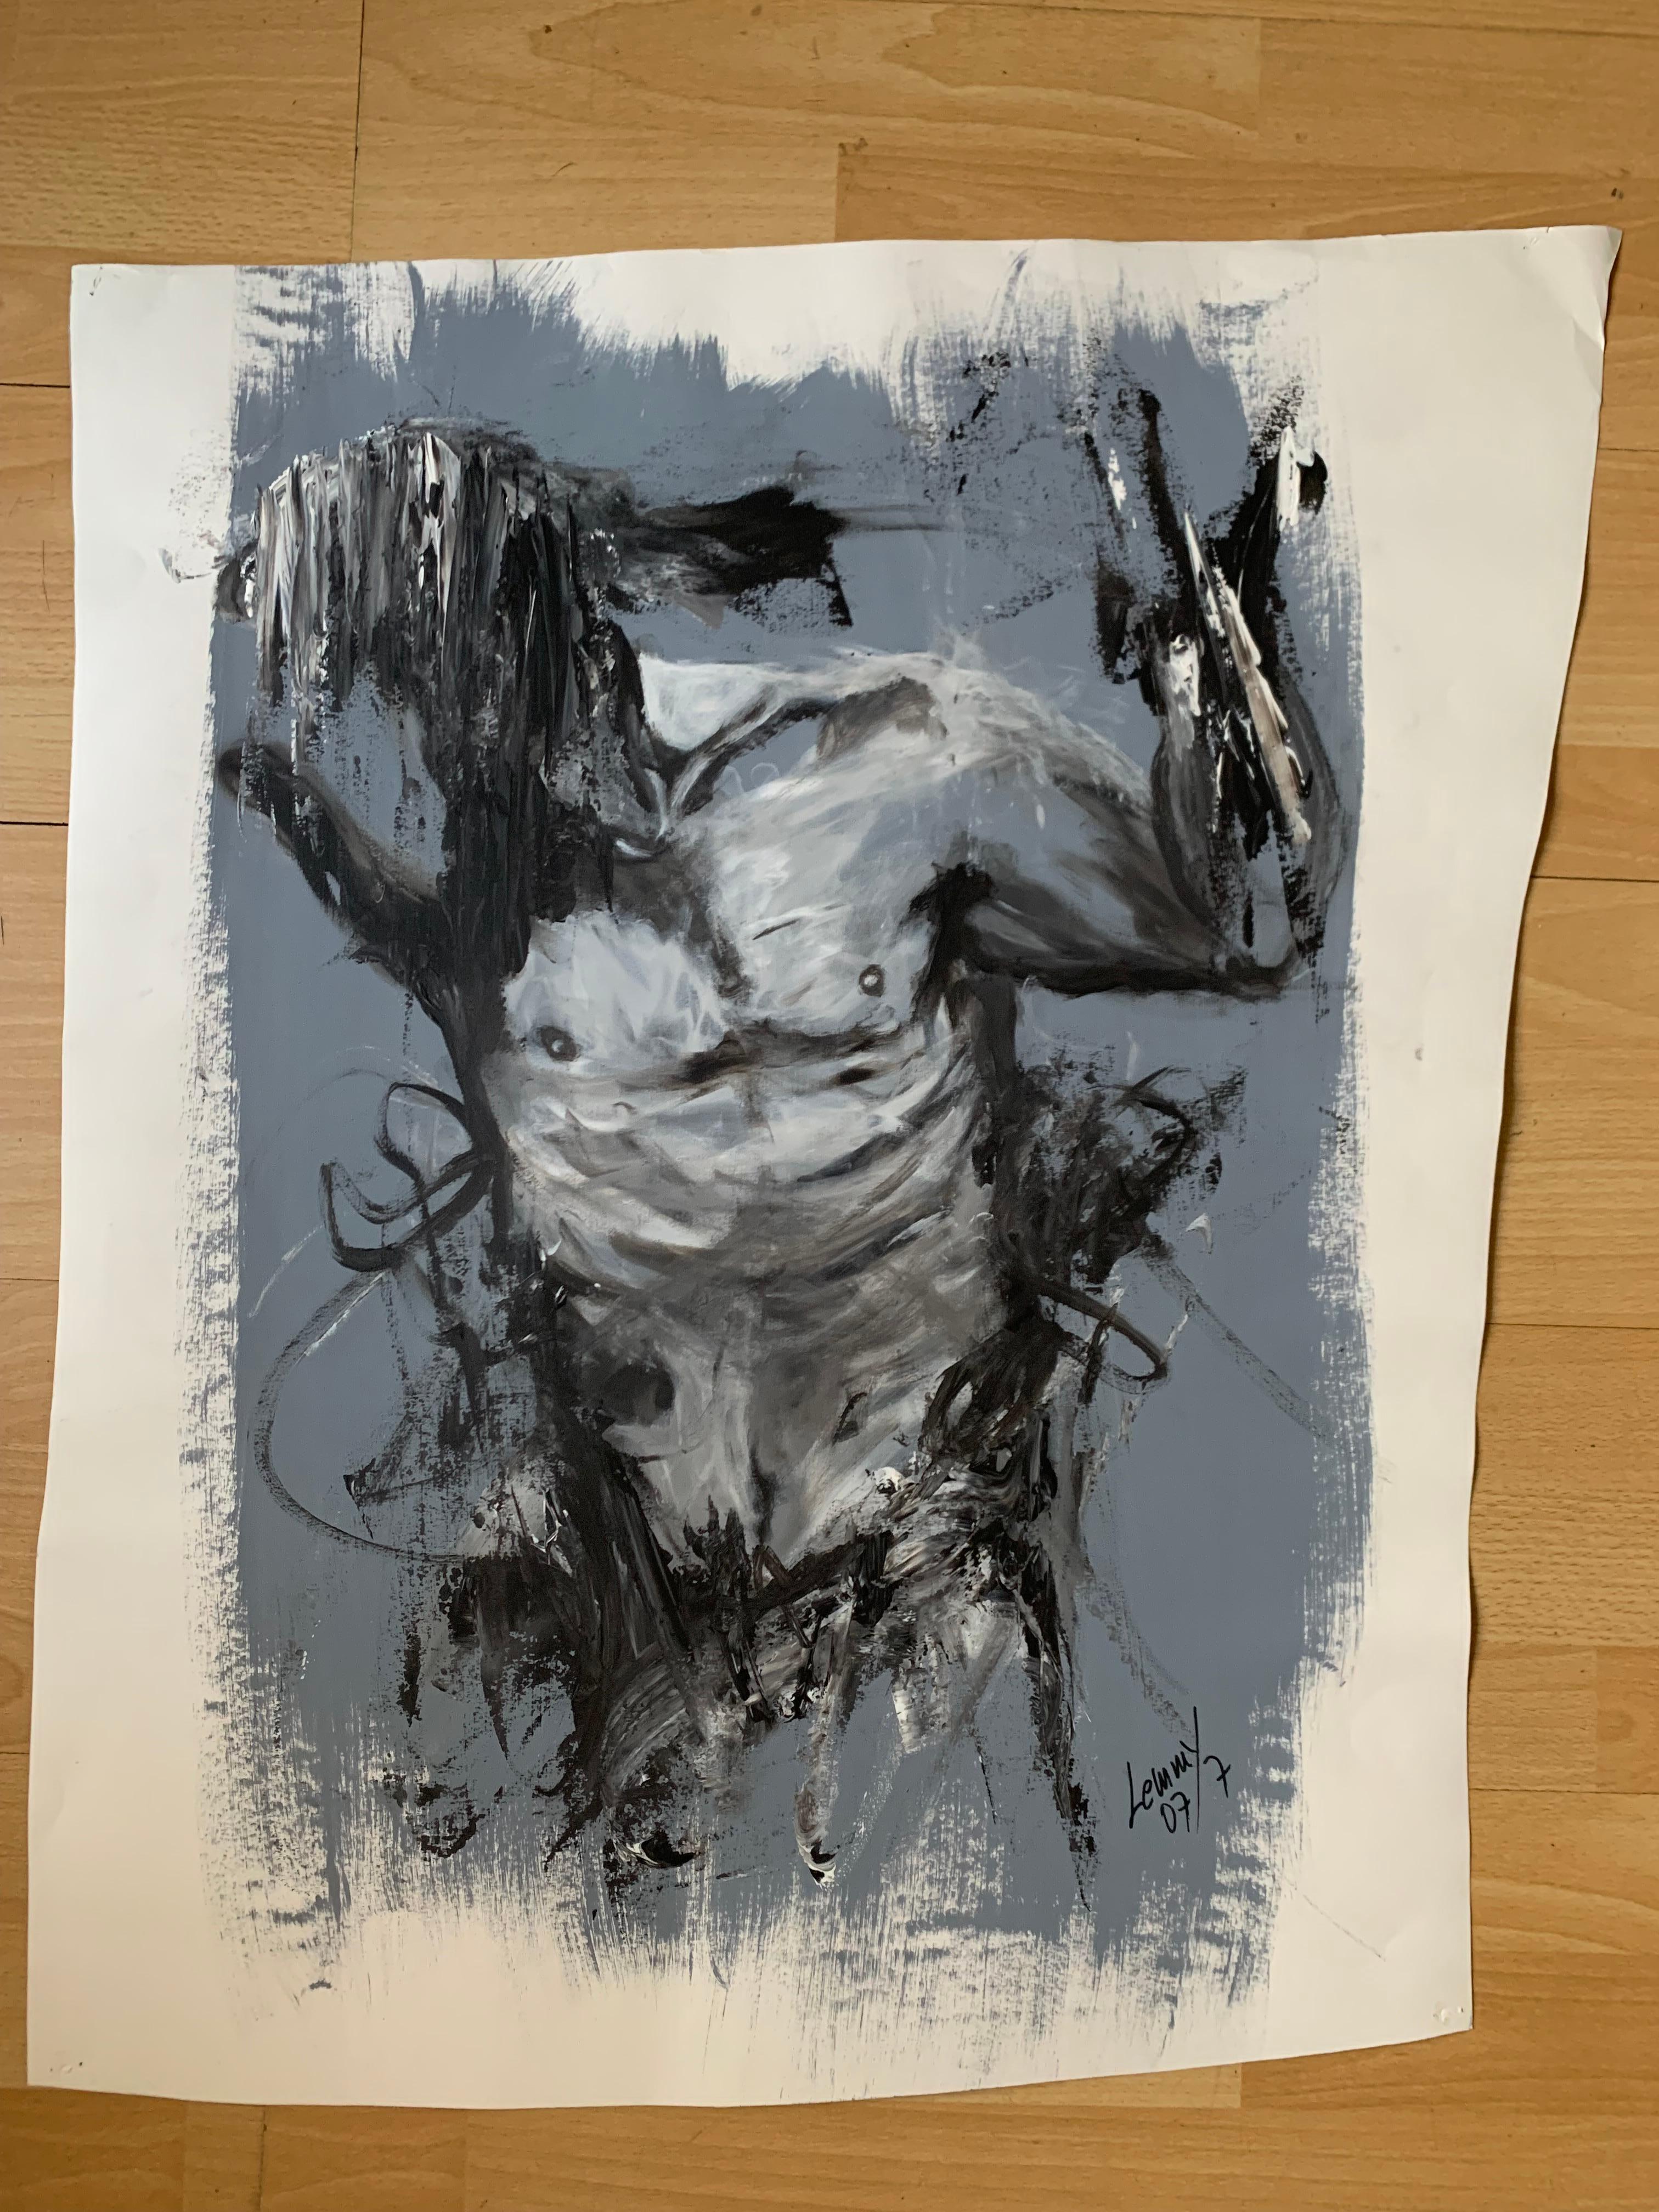 Lemmy Gonthier - Body 1
Acrylic
Numbered and signed lower right of the work
Dimensions: 77 x 68

The human body is at the center of Lemmy's work. His taste for large formats requires precision
striking anatomy. The movement that is suggested in each